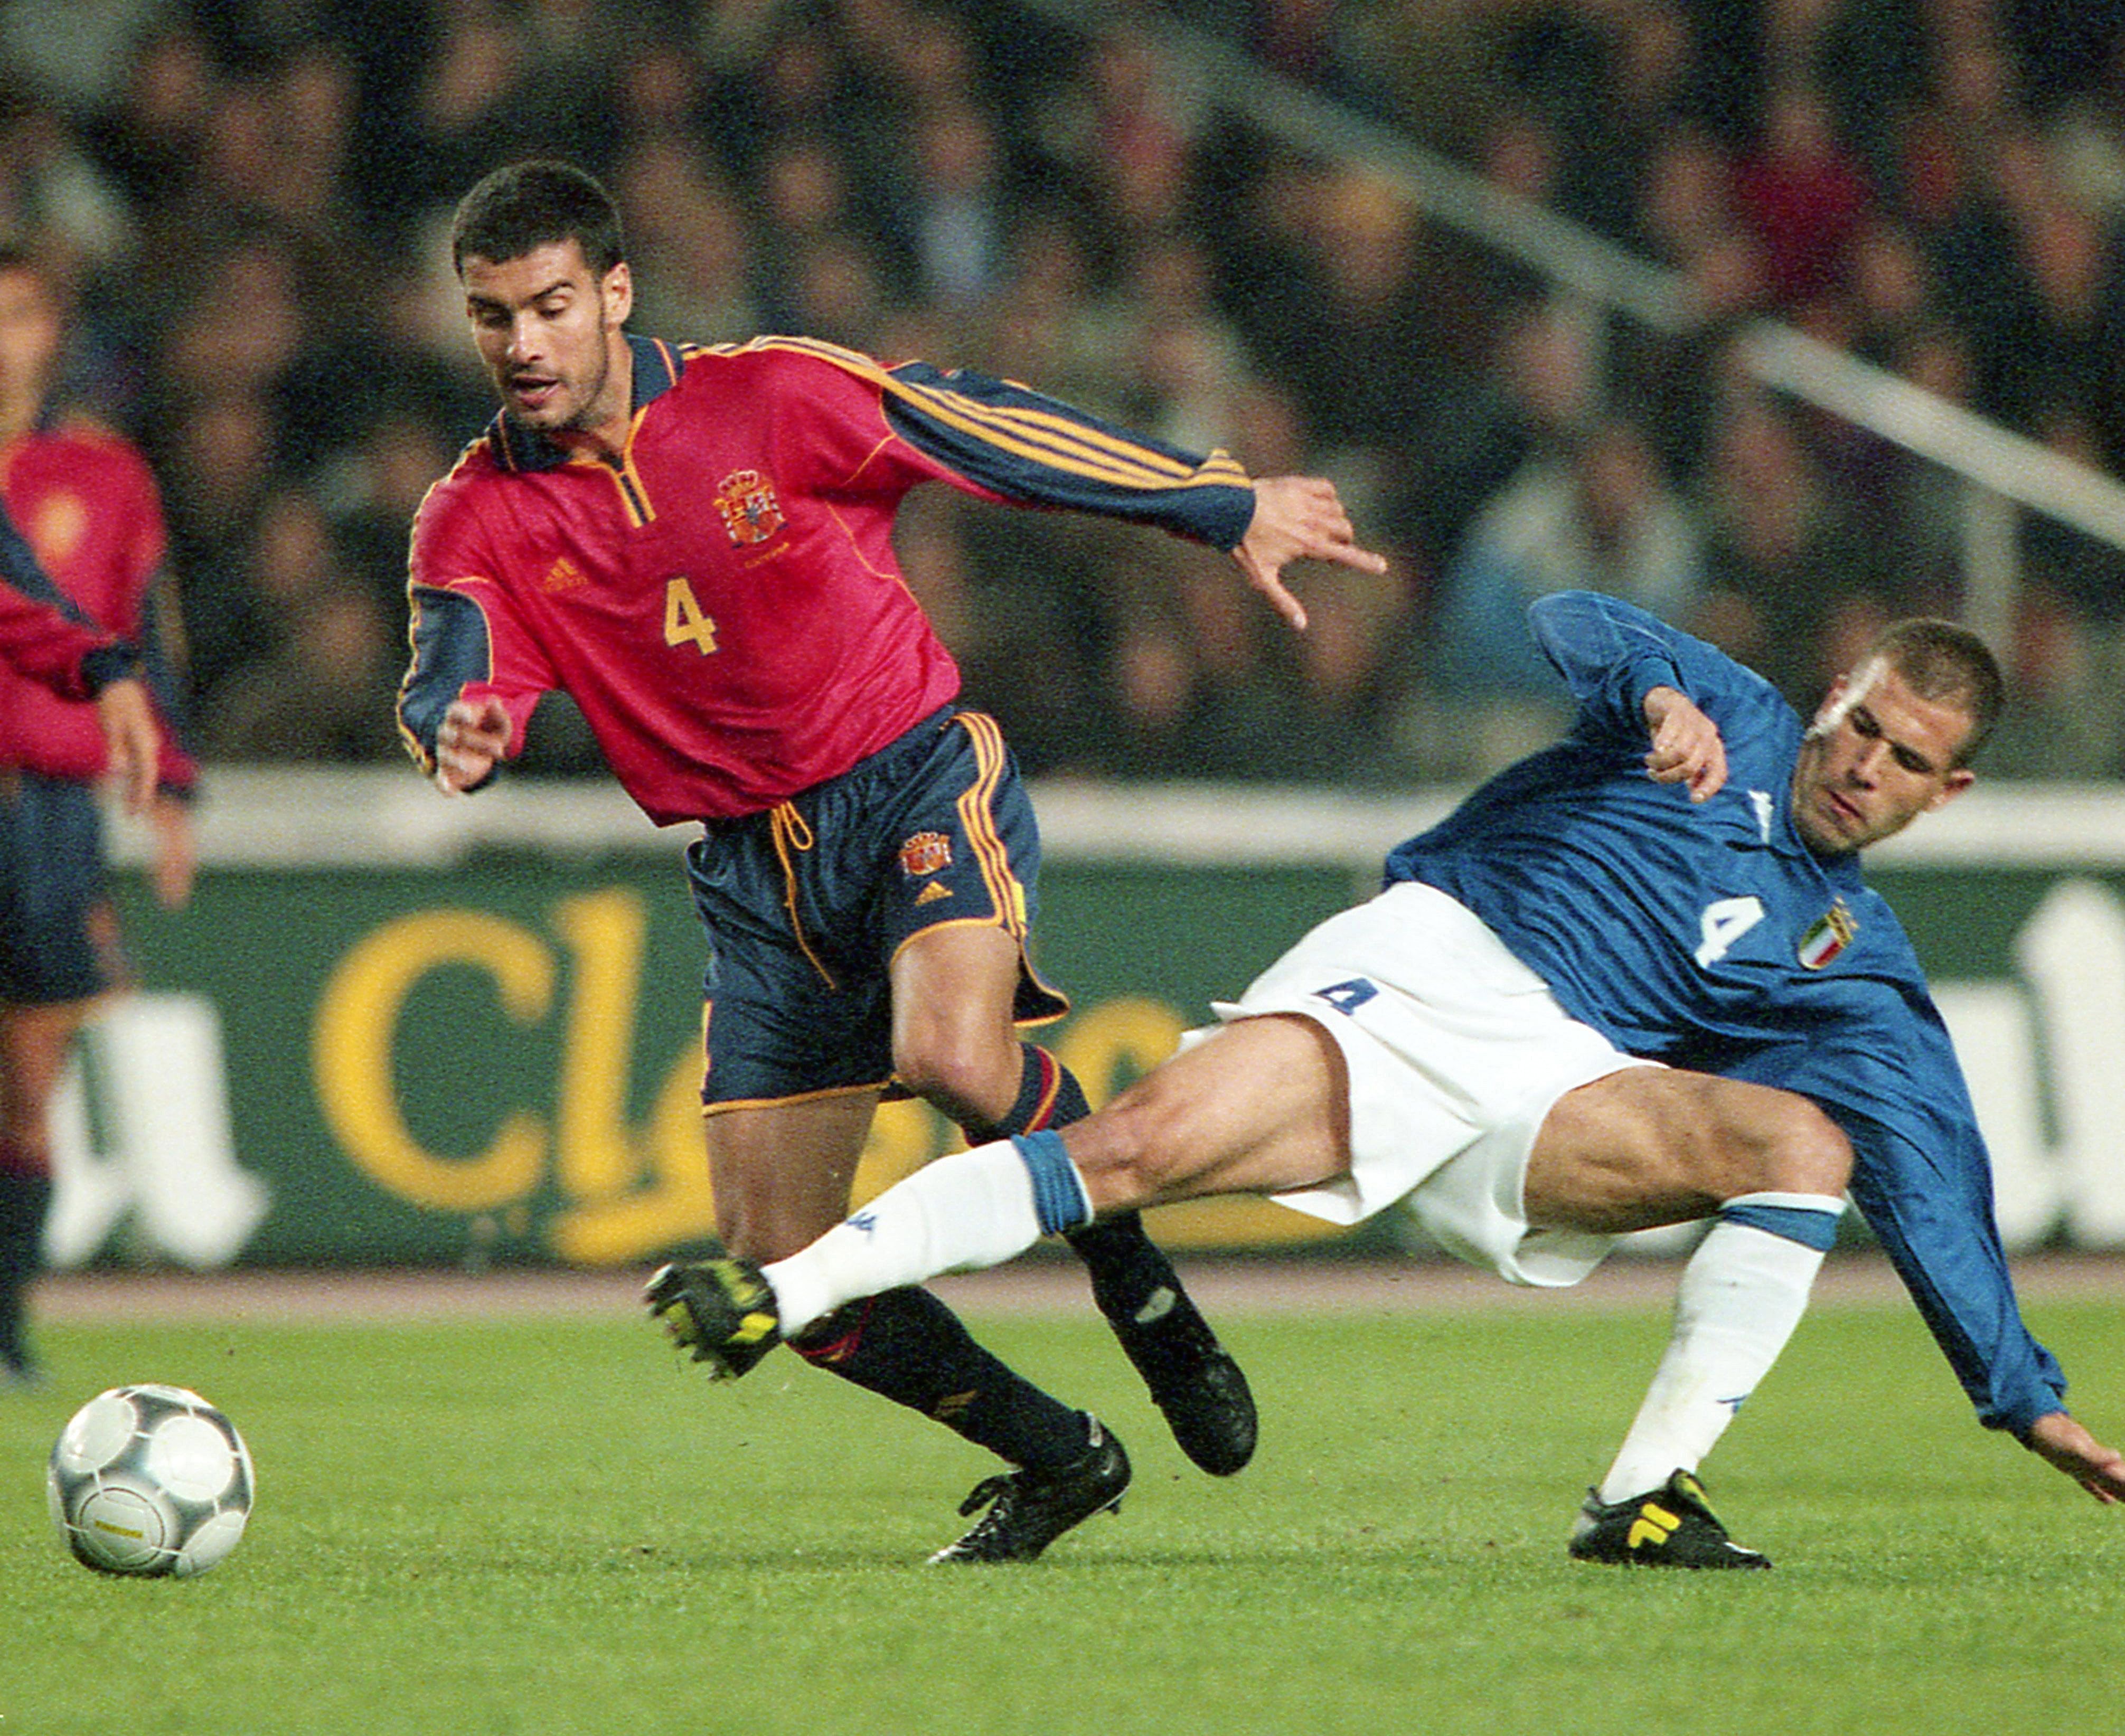 Pep Guardiola competes for the ball with Luigi Di Biagio in a friendly between Spain and Italy in March 2000.